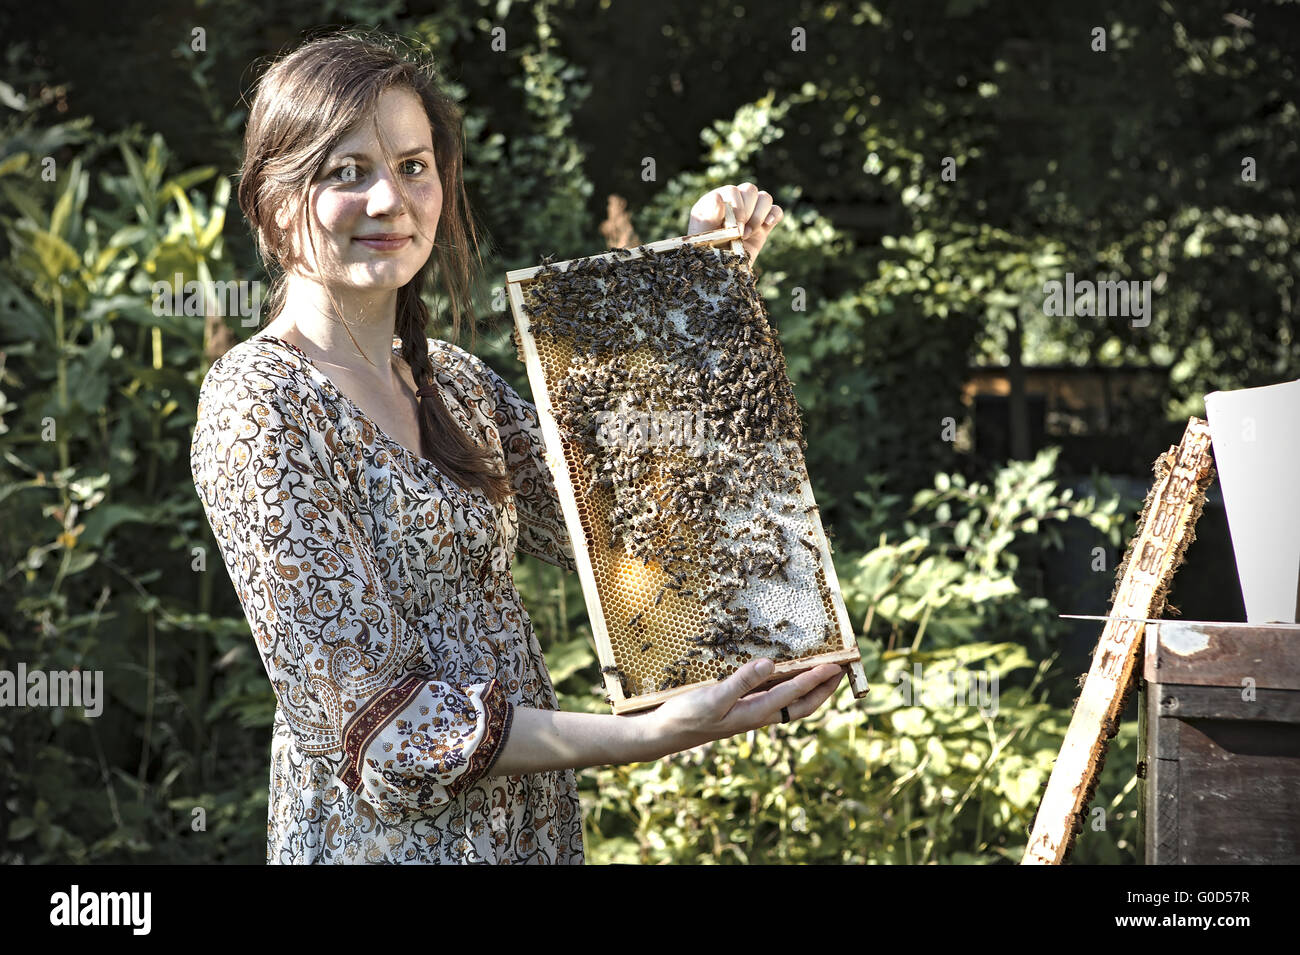 Women behind the lens: the female beekeepers who hold 'the keys to